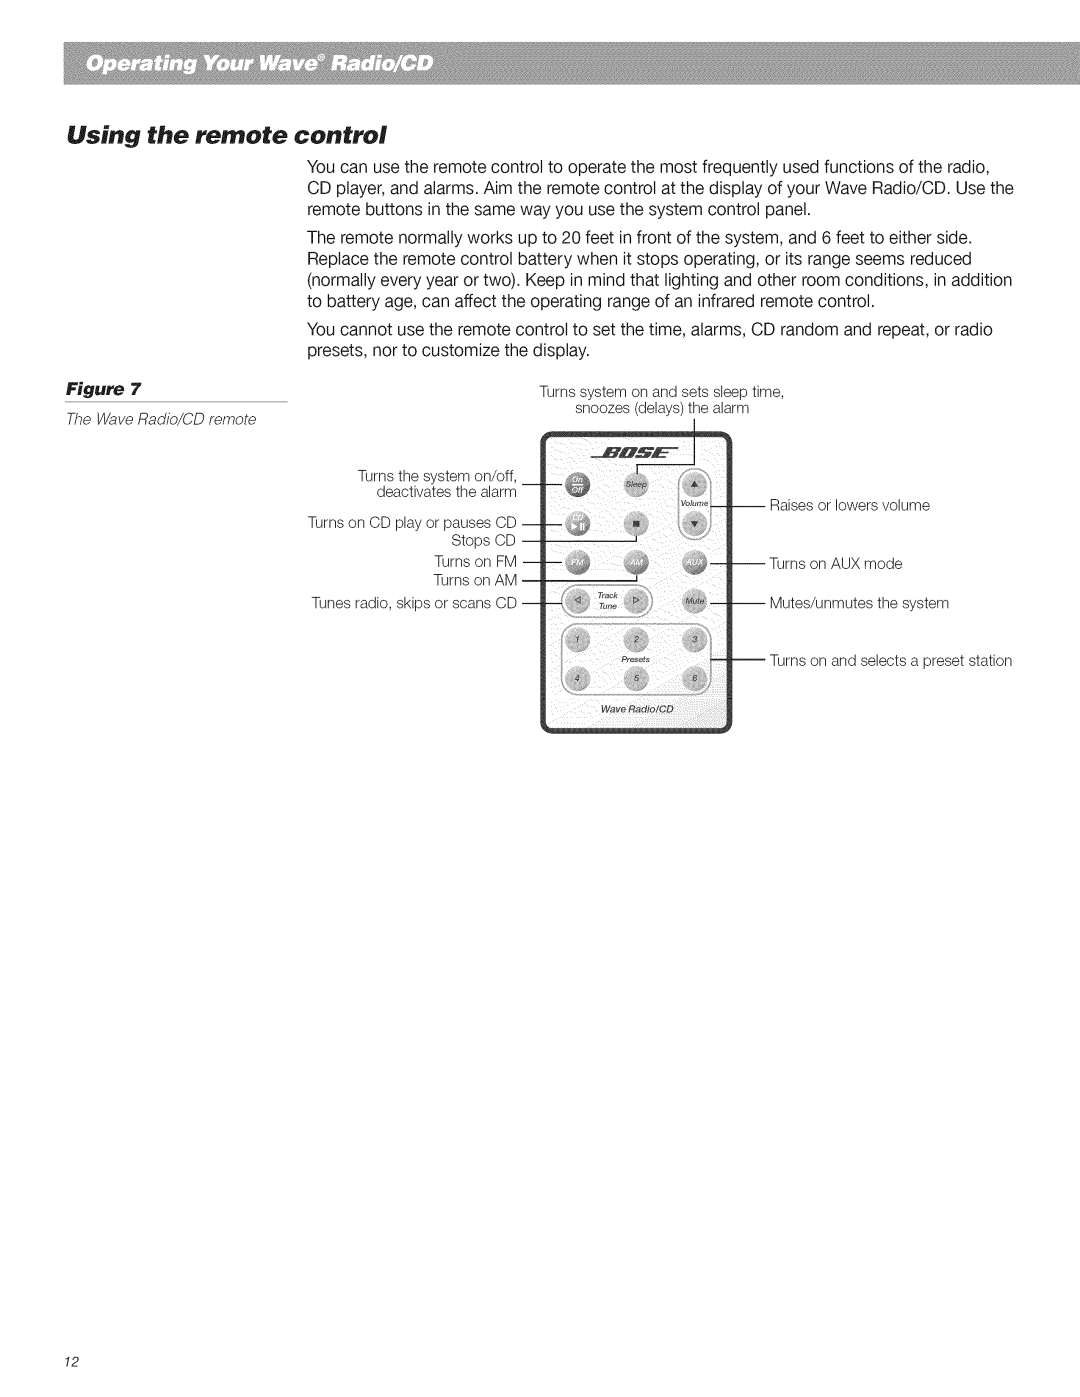 Bose CD Player manual Using the remote, control 